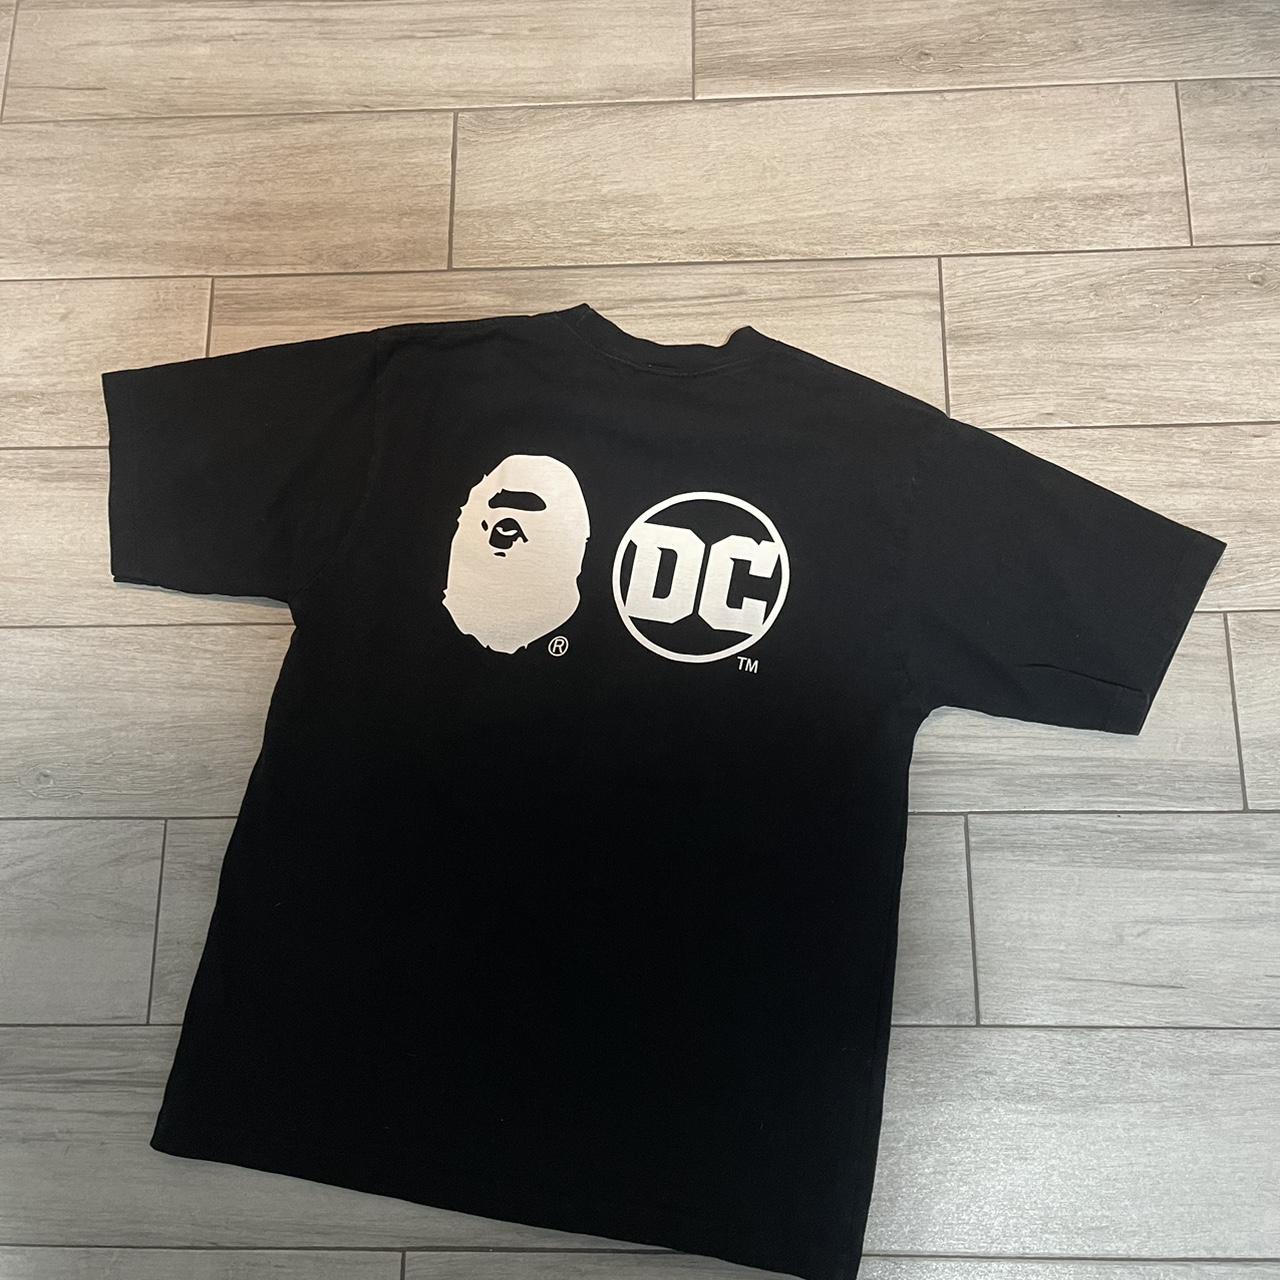 Bape x Dc Batman tee size small , Open to offers ,...